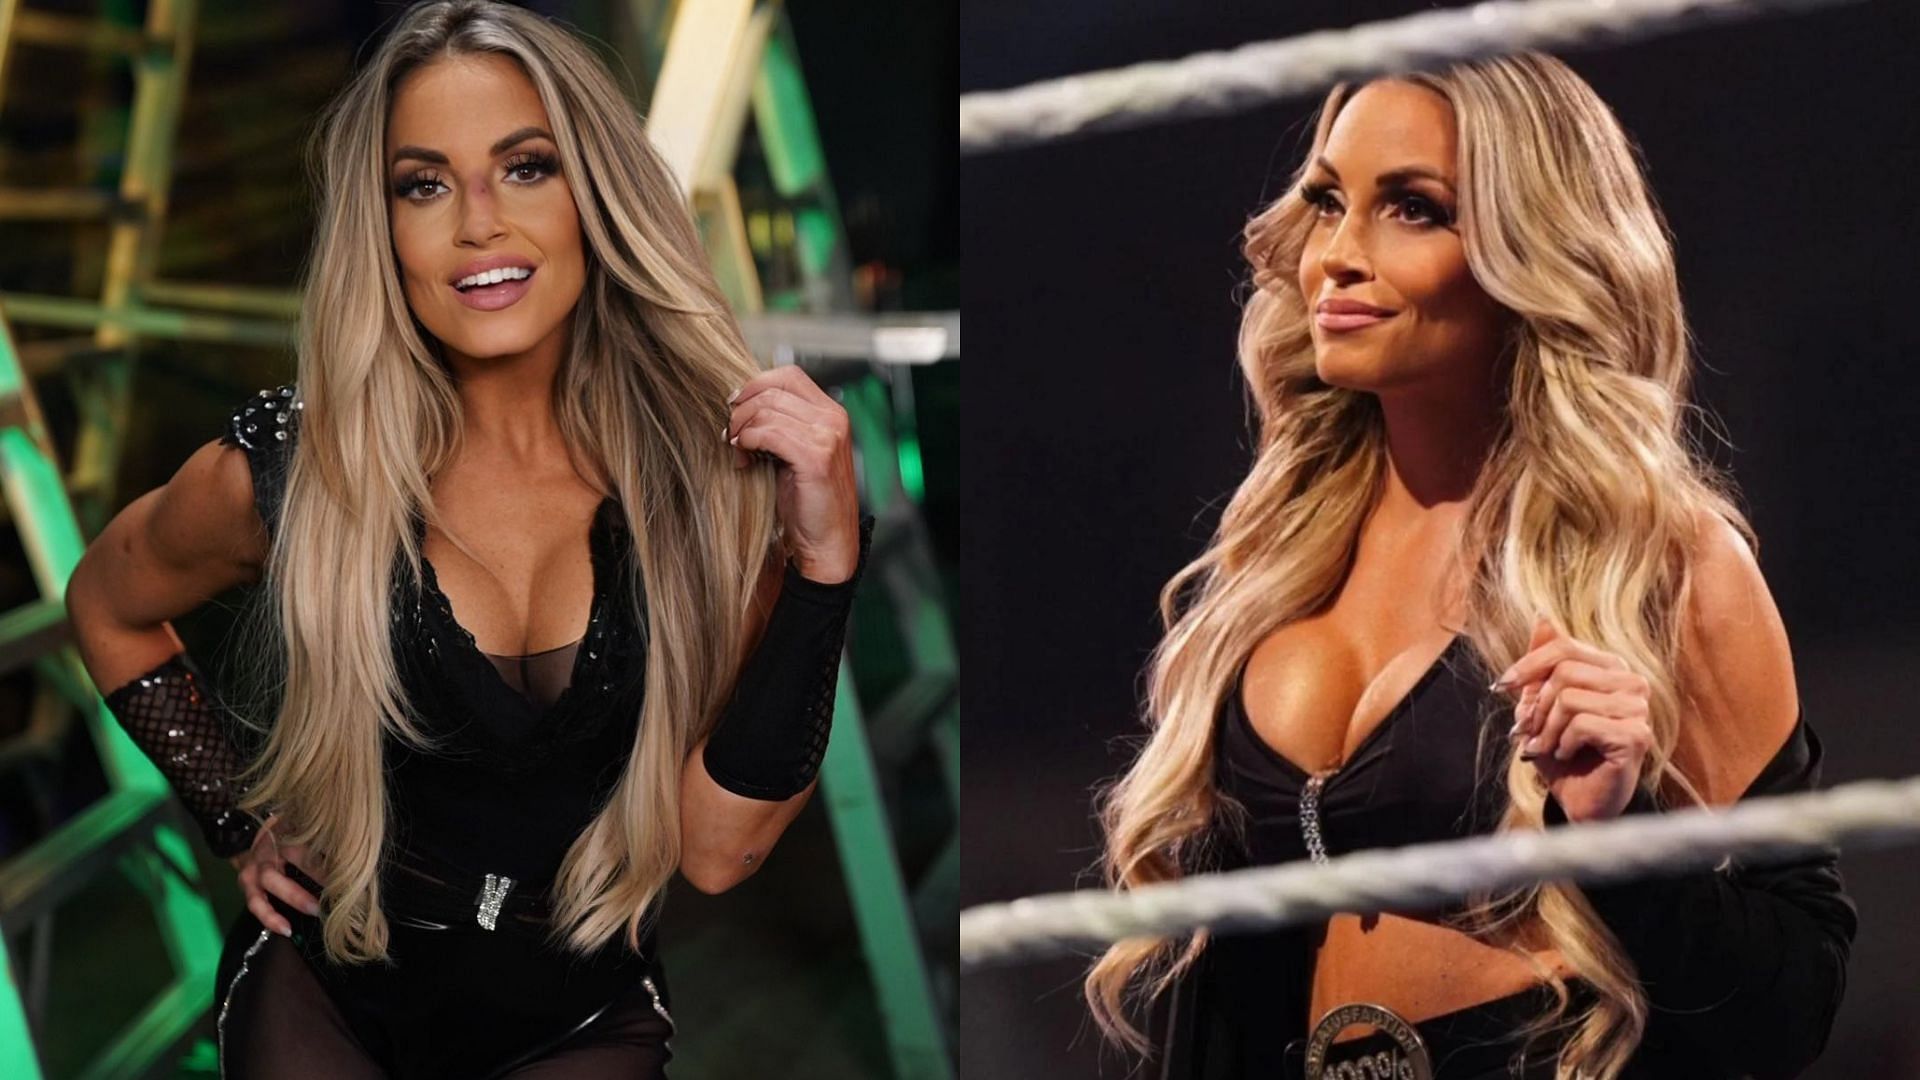 Trish Stratus is not happy with this WWE personality